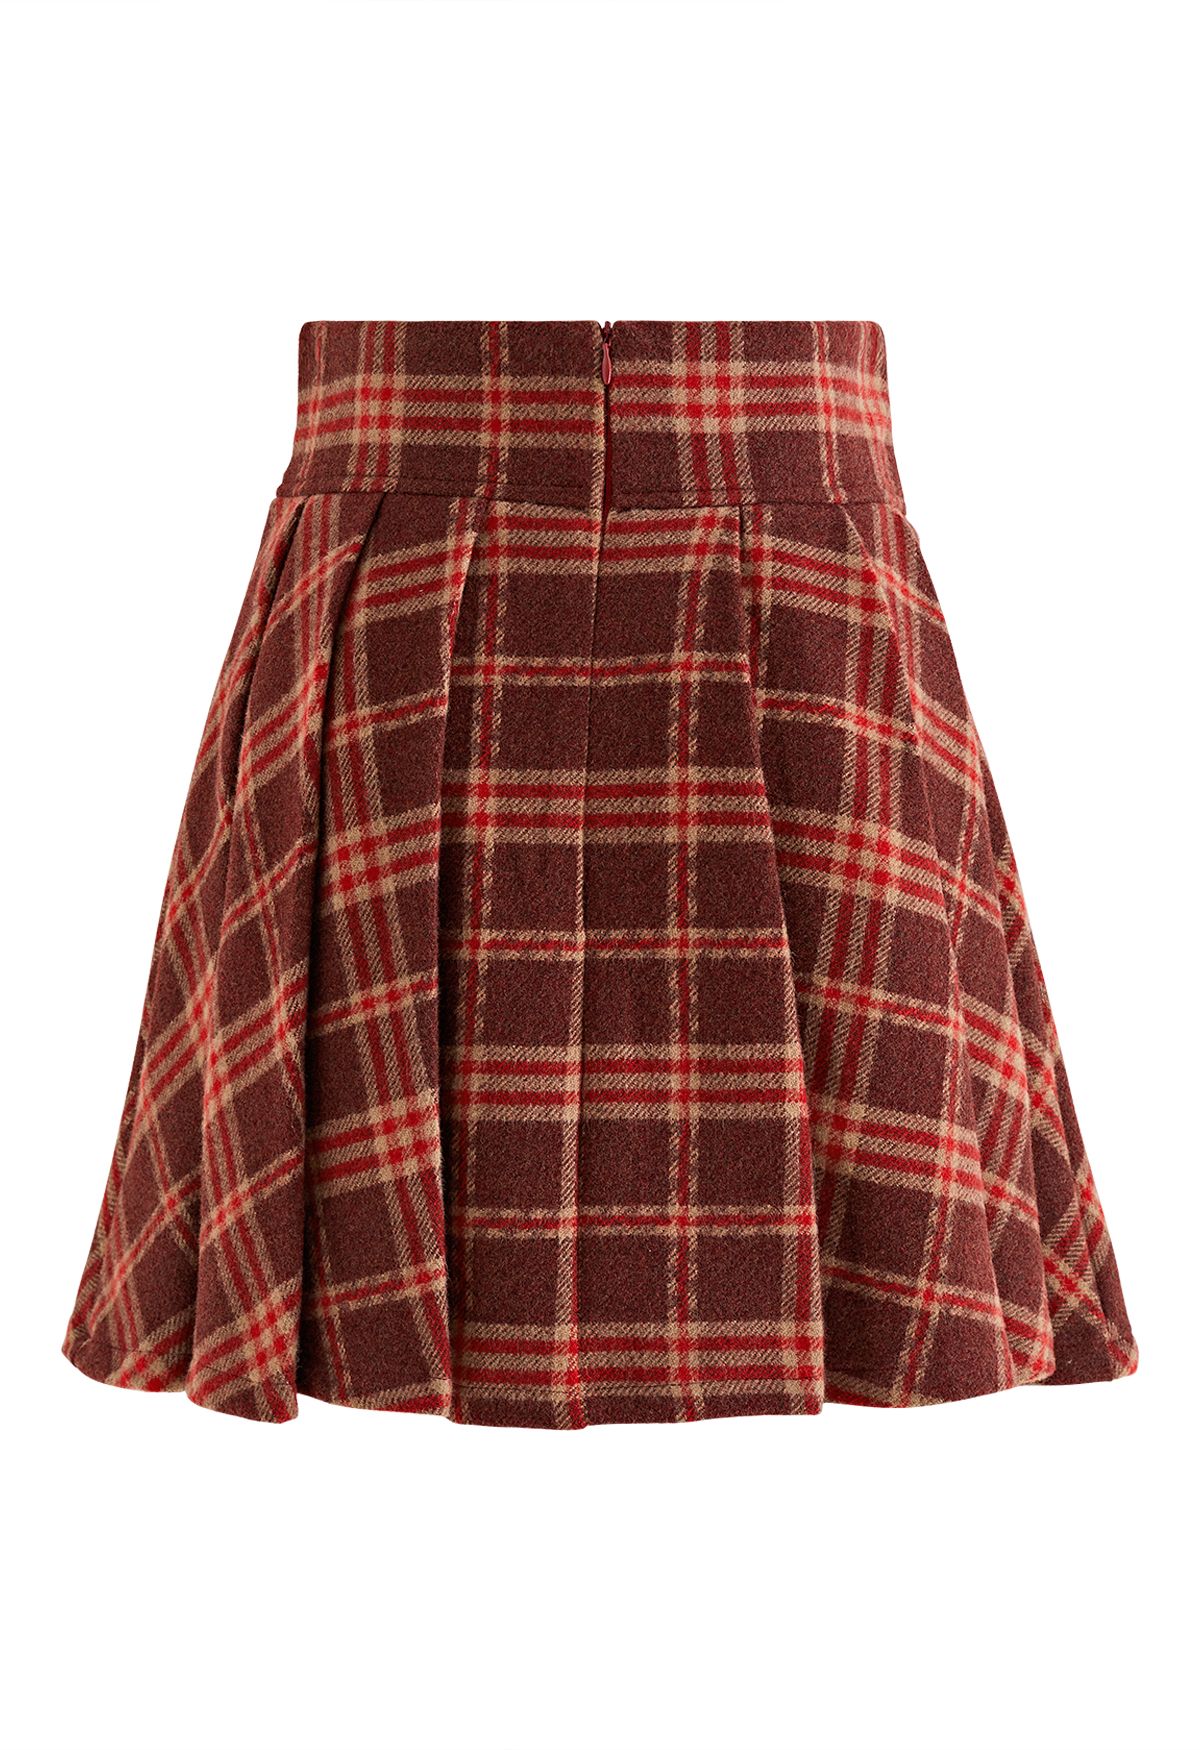 Golden Button Pleated Flare Mini Skirt in Red Plaid